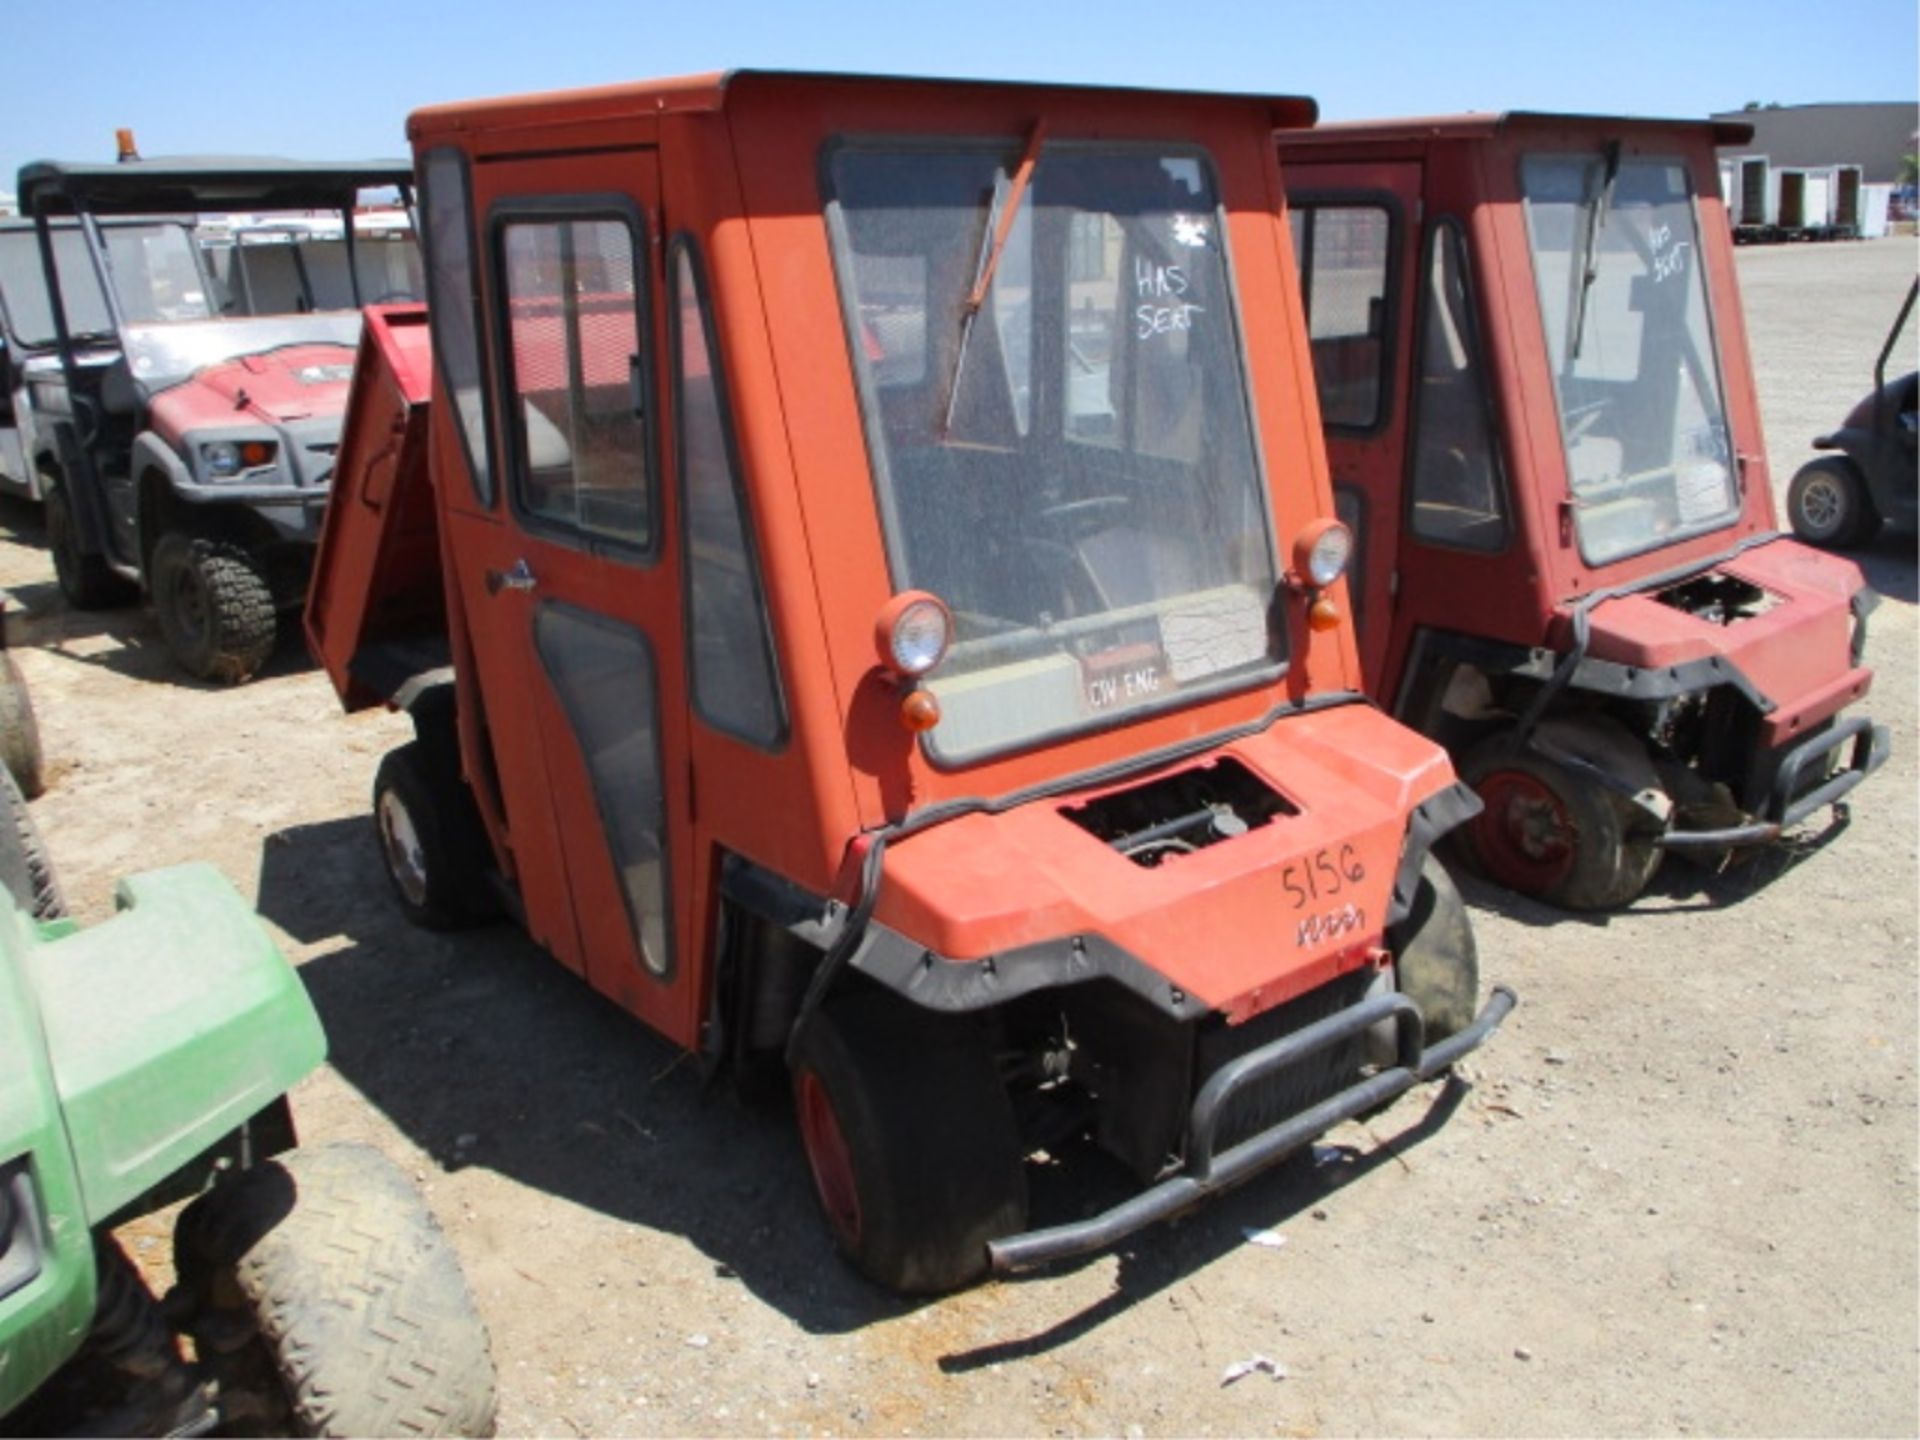 Kawasaki AF450 Utility Cart, Gas, Rear Dump Bed, Canopy, **Non-Operational**, Mile/Hours - 9587 - Image 8 of 36